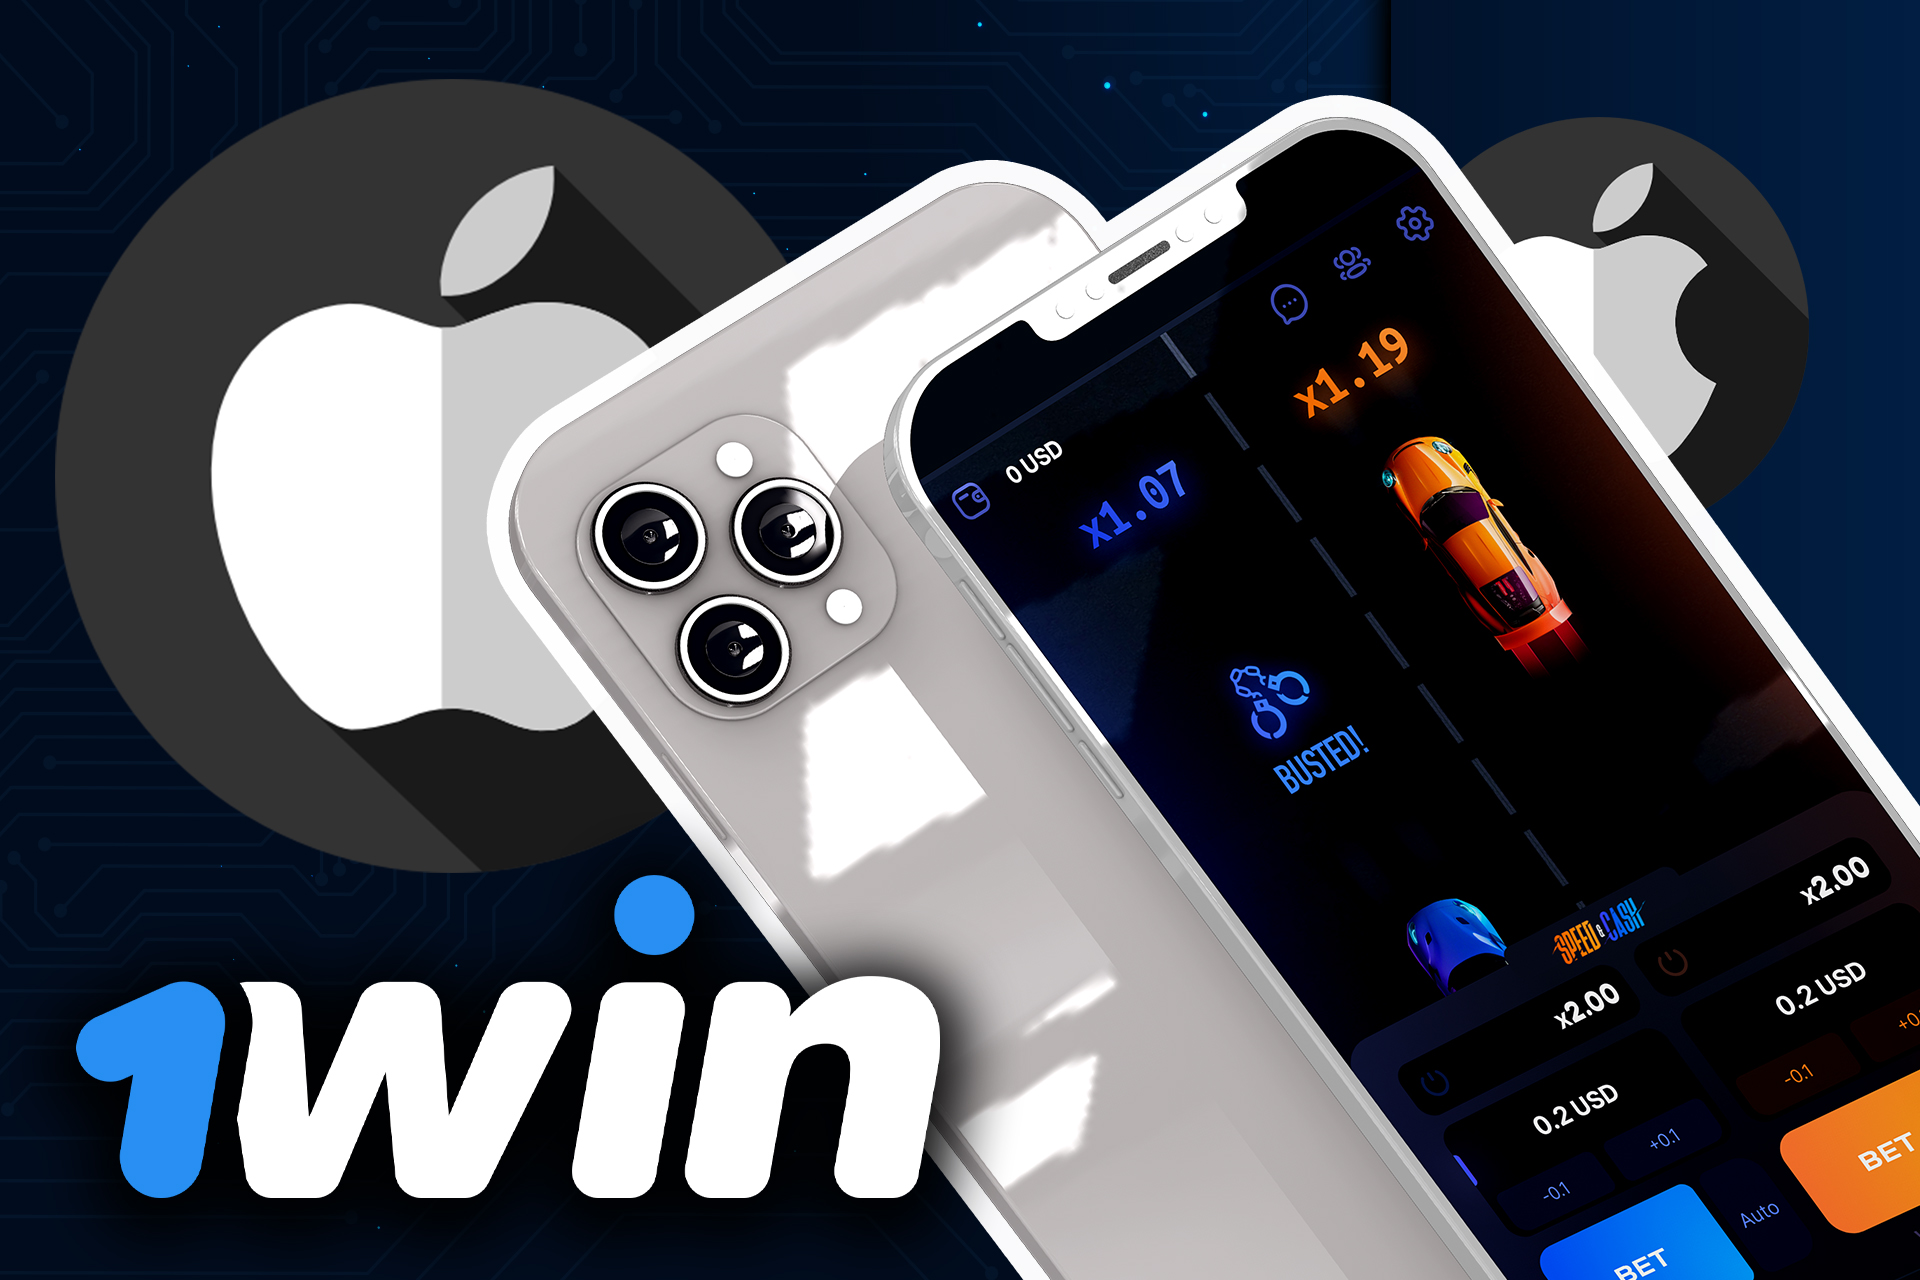 Install the 1win app on your iPhone and play Speed and Cash.